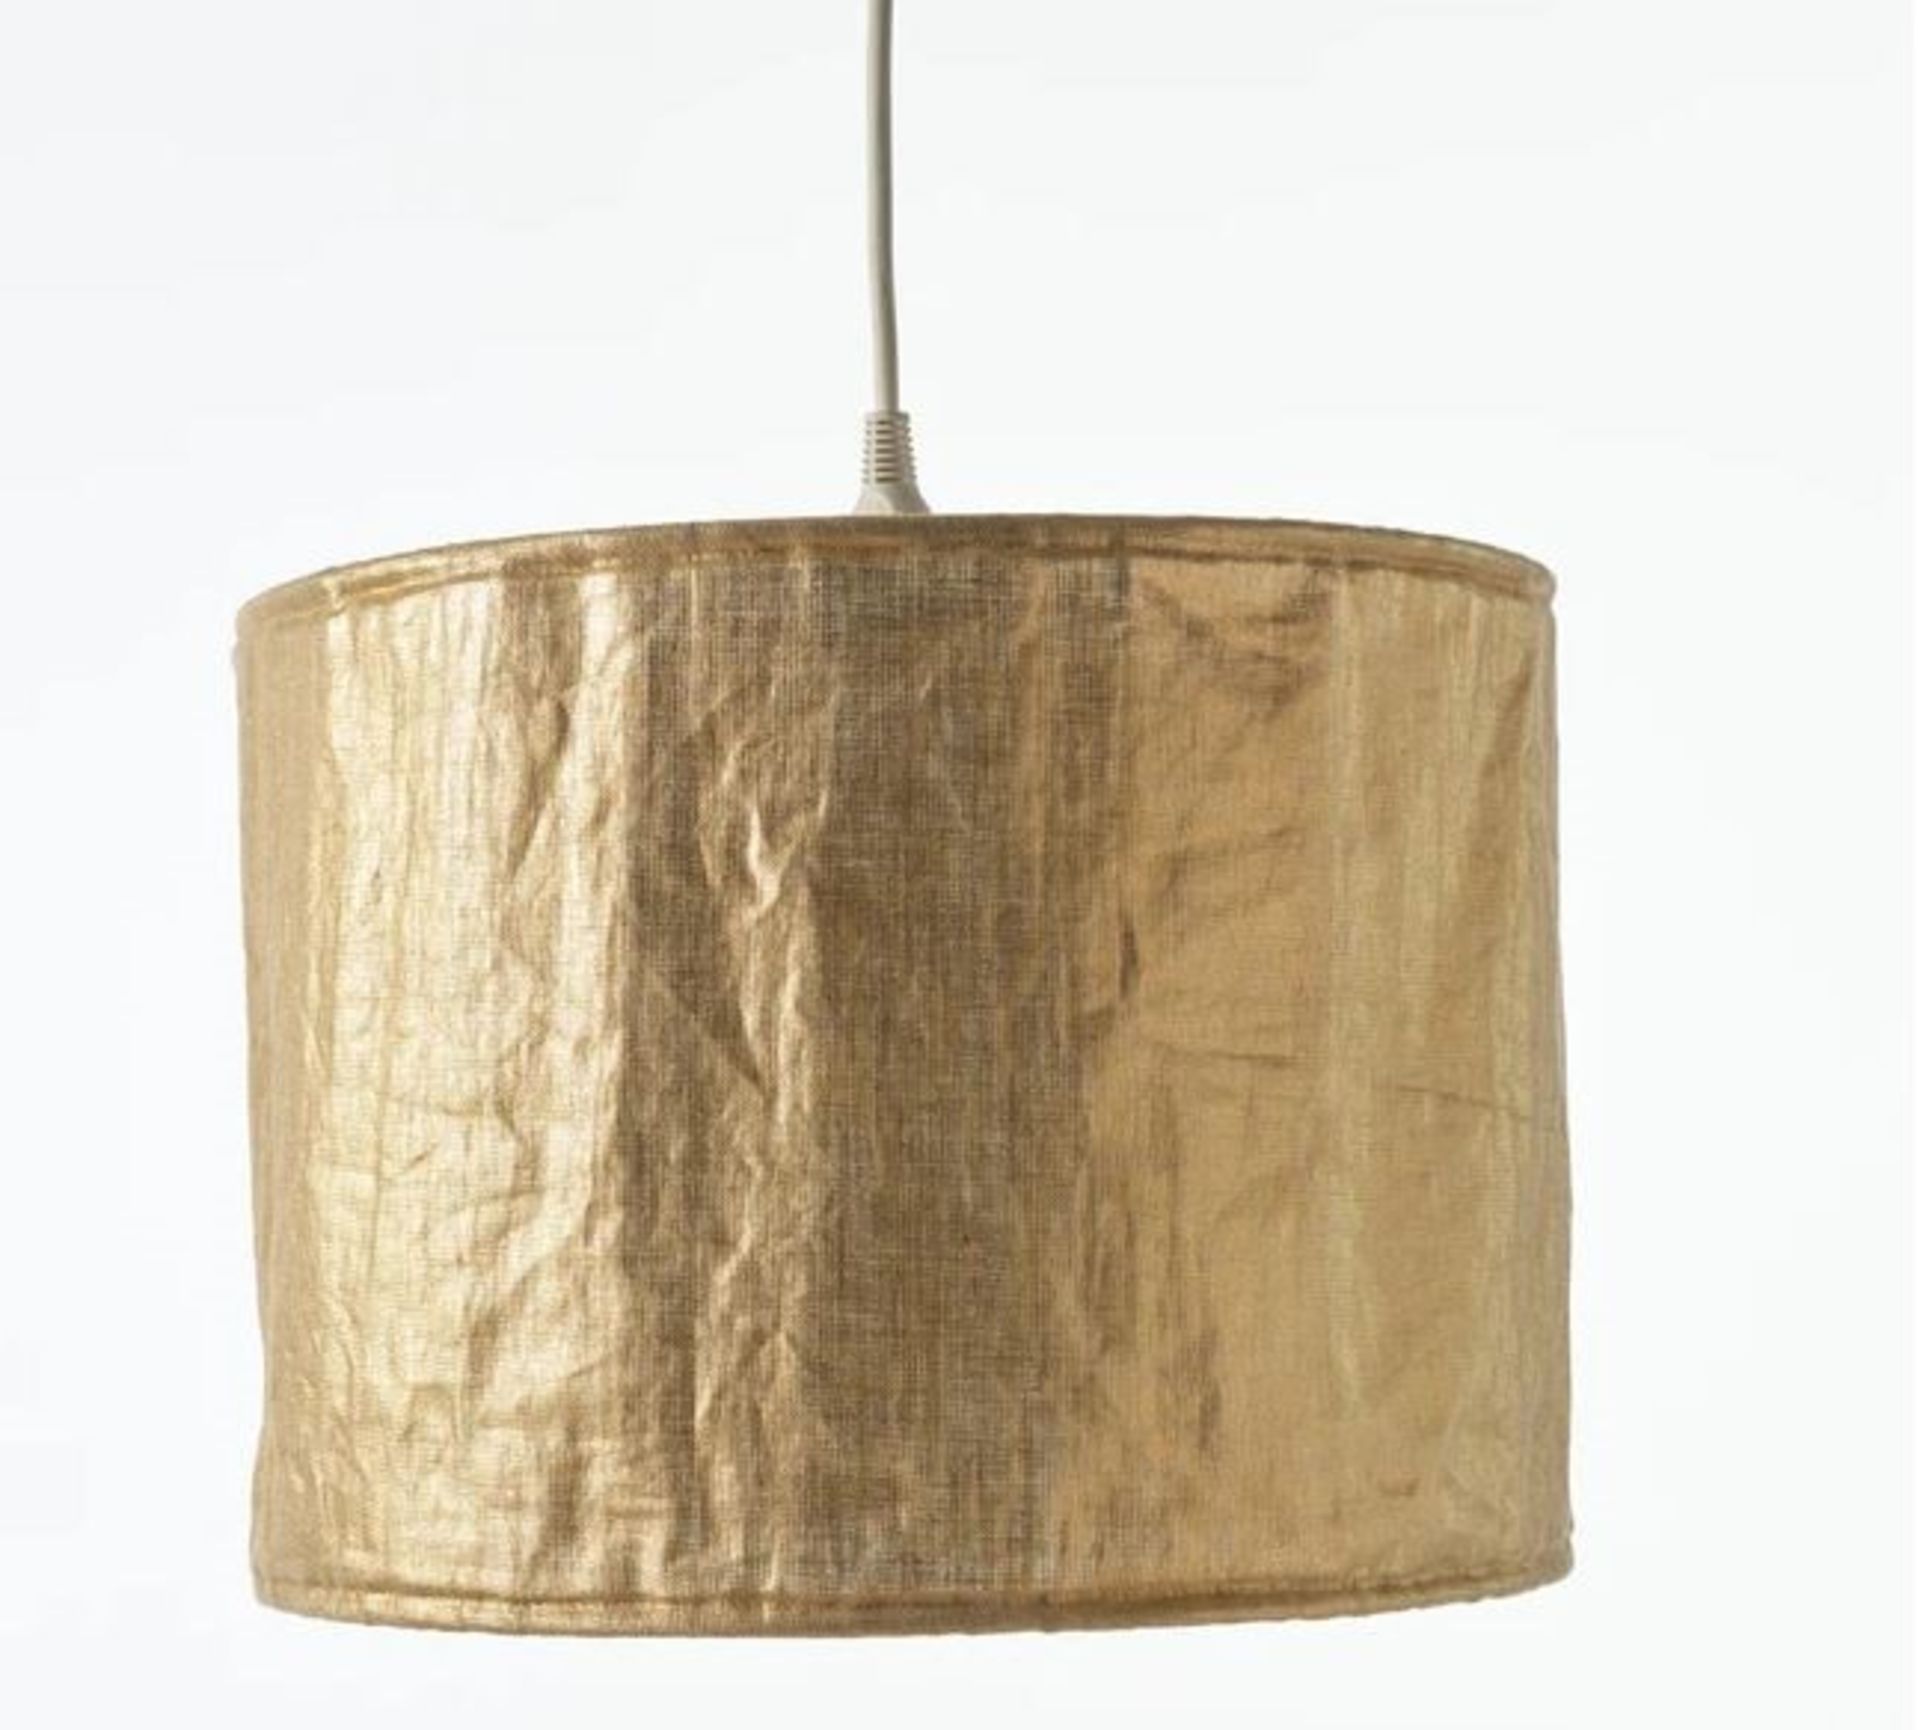 1 X LA REDOUTE GOLDYNI CRINKLED LINEN LAMPSHADE IN GOLD / RRP £38.00 / GRADE A